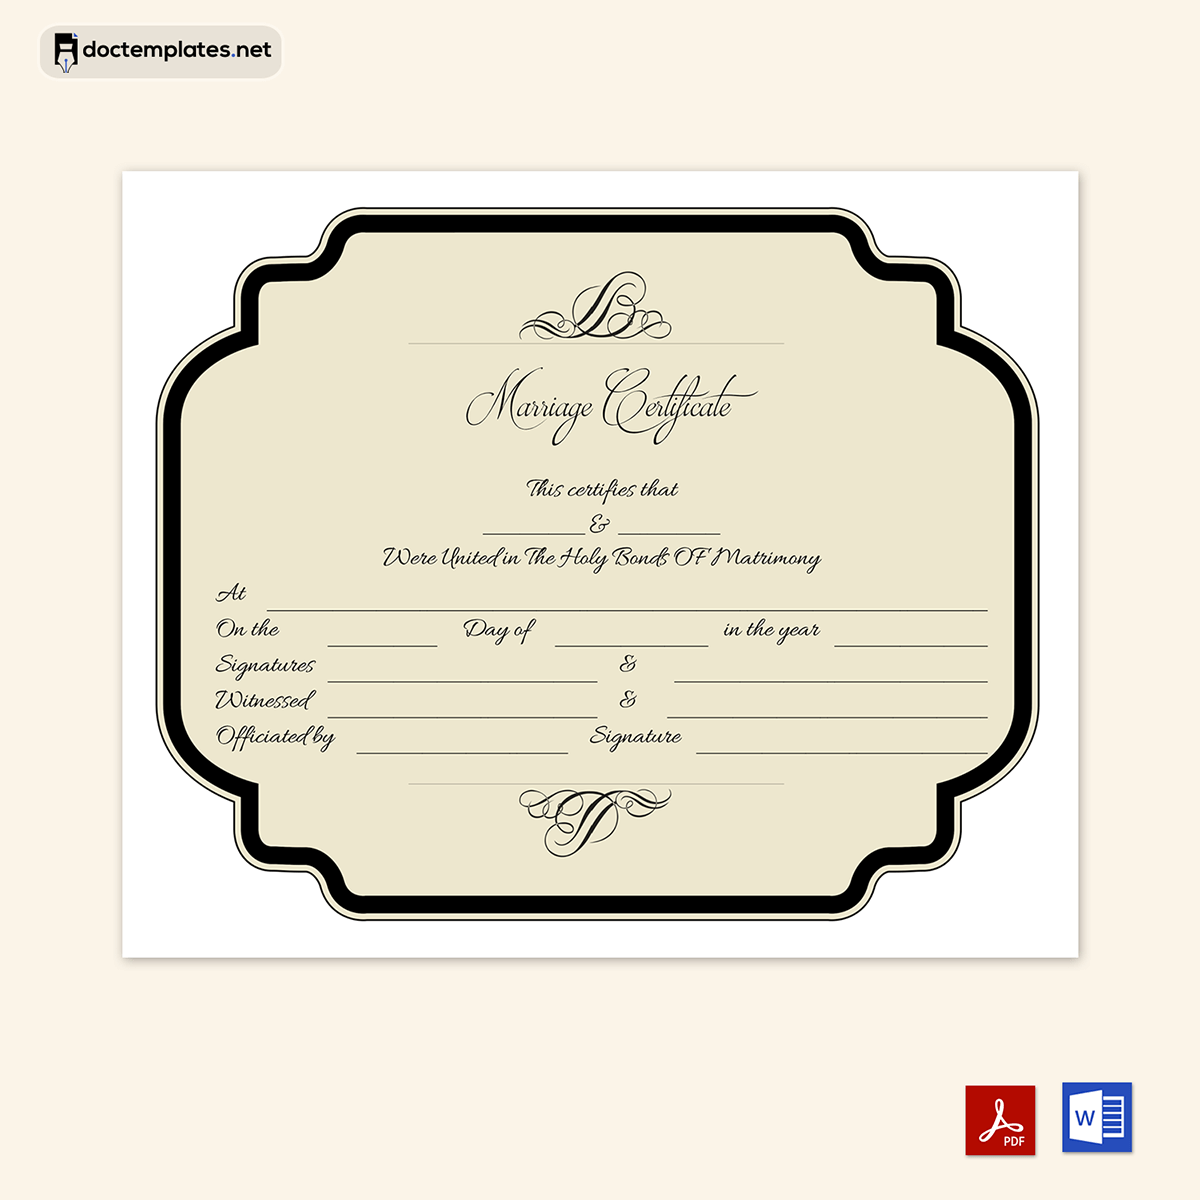  marriage certificate online fake 05